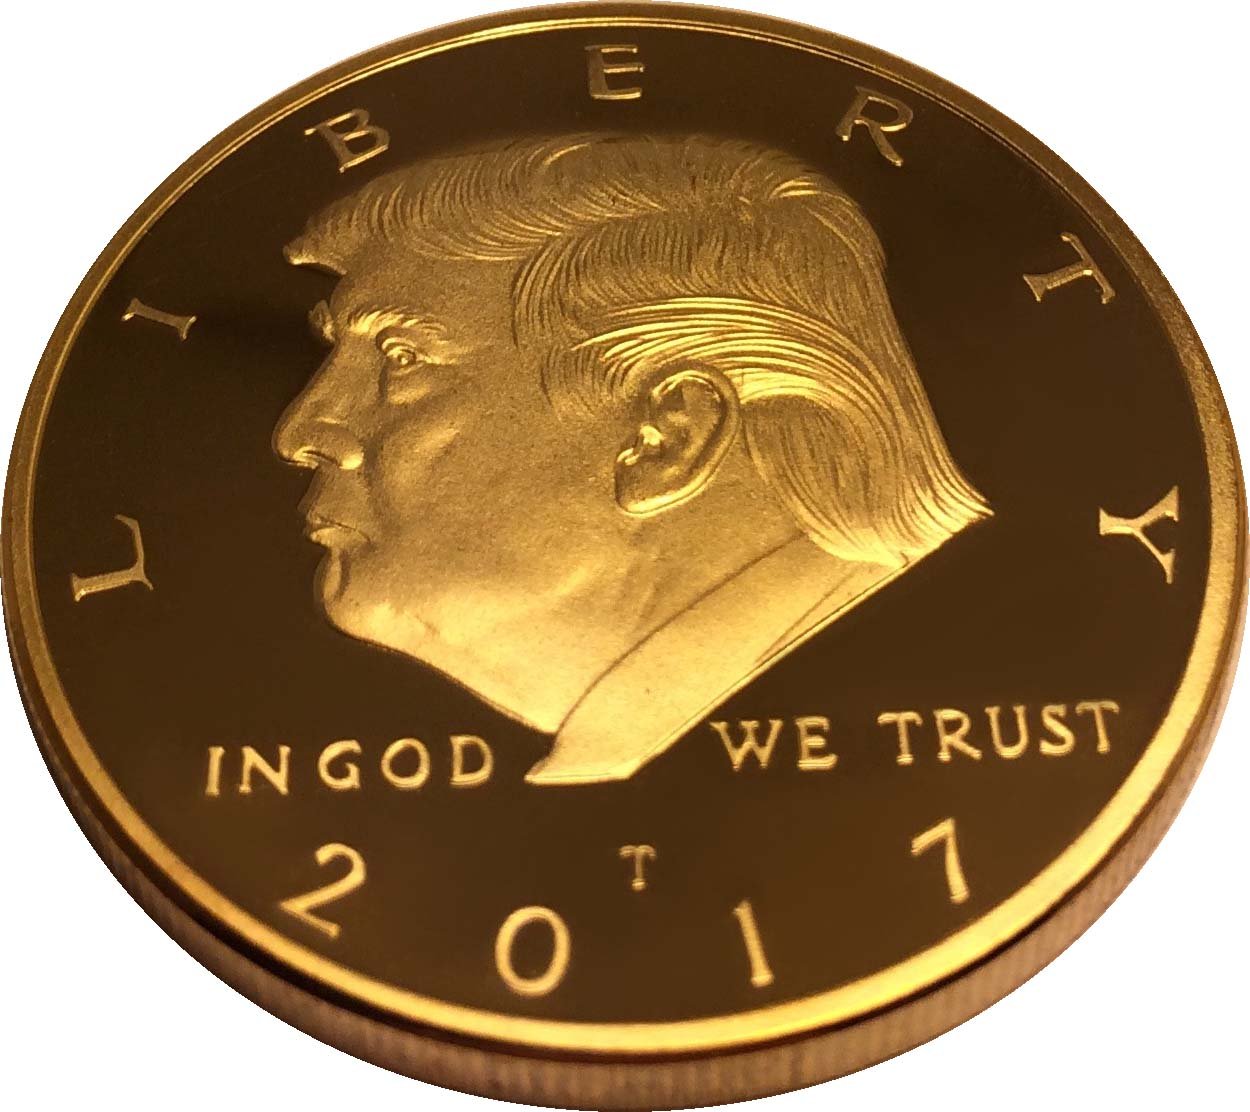 Is There A Donald Trump Coin